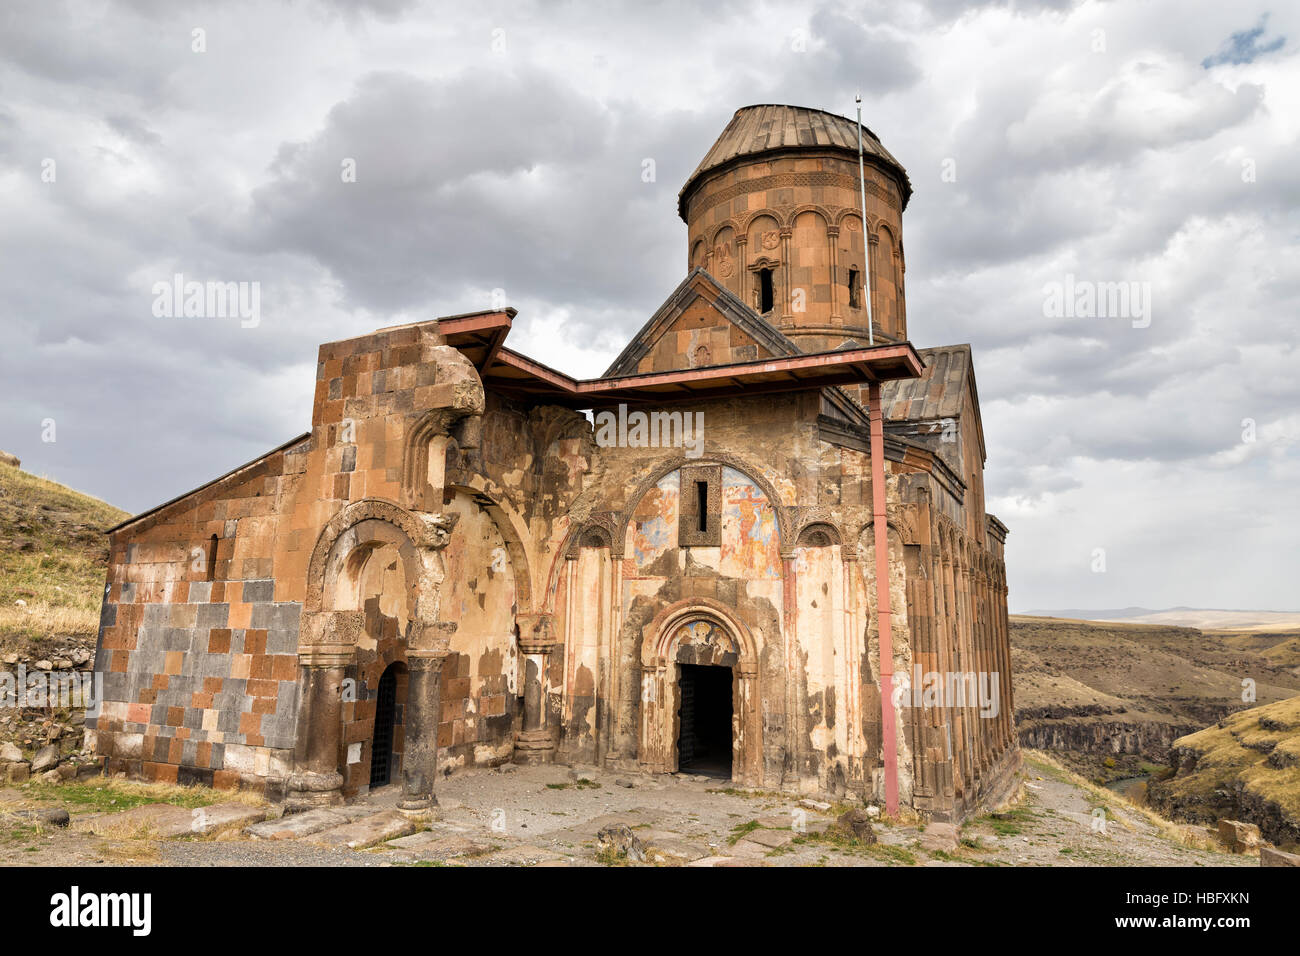 Facade view of Saint Gregory of Tigran Honents in Ani. Ani is a ruined medieval Armenian city situated in Kars. Stock Photo